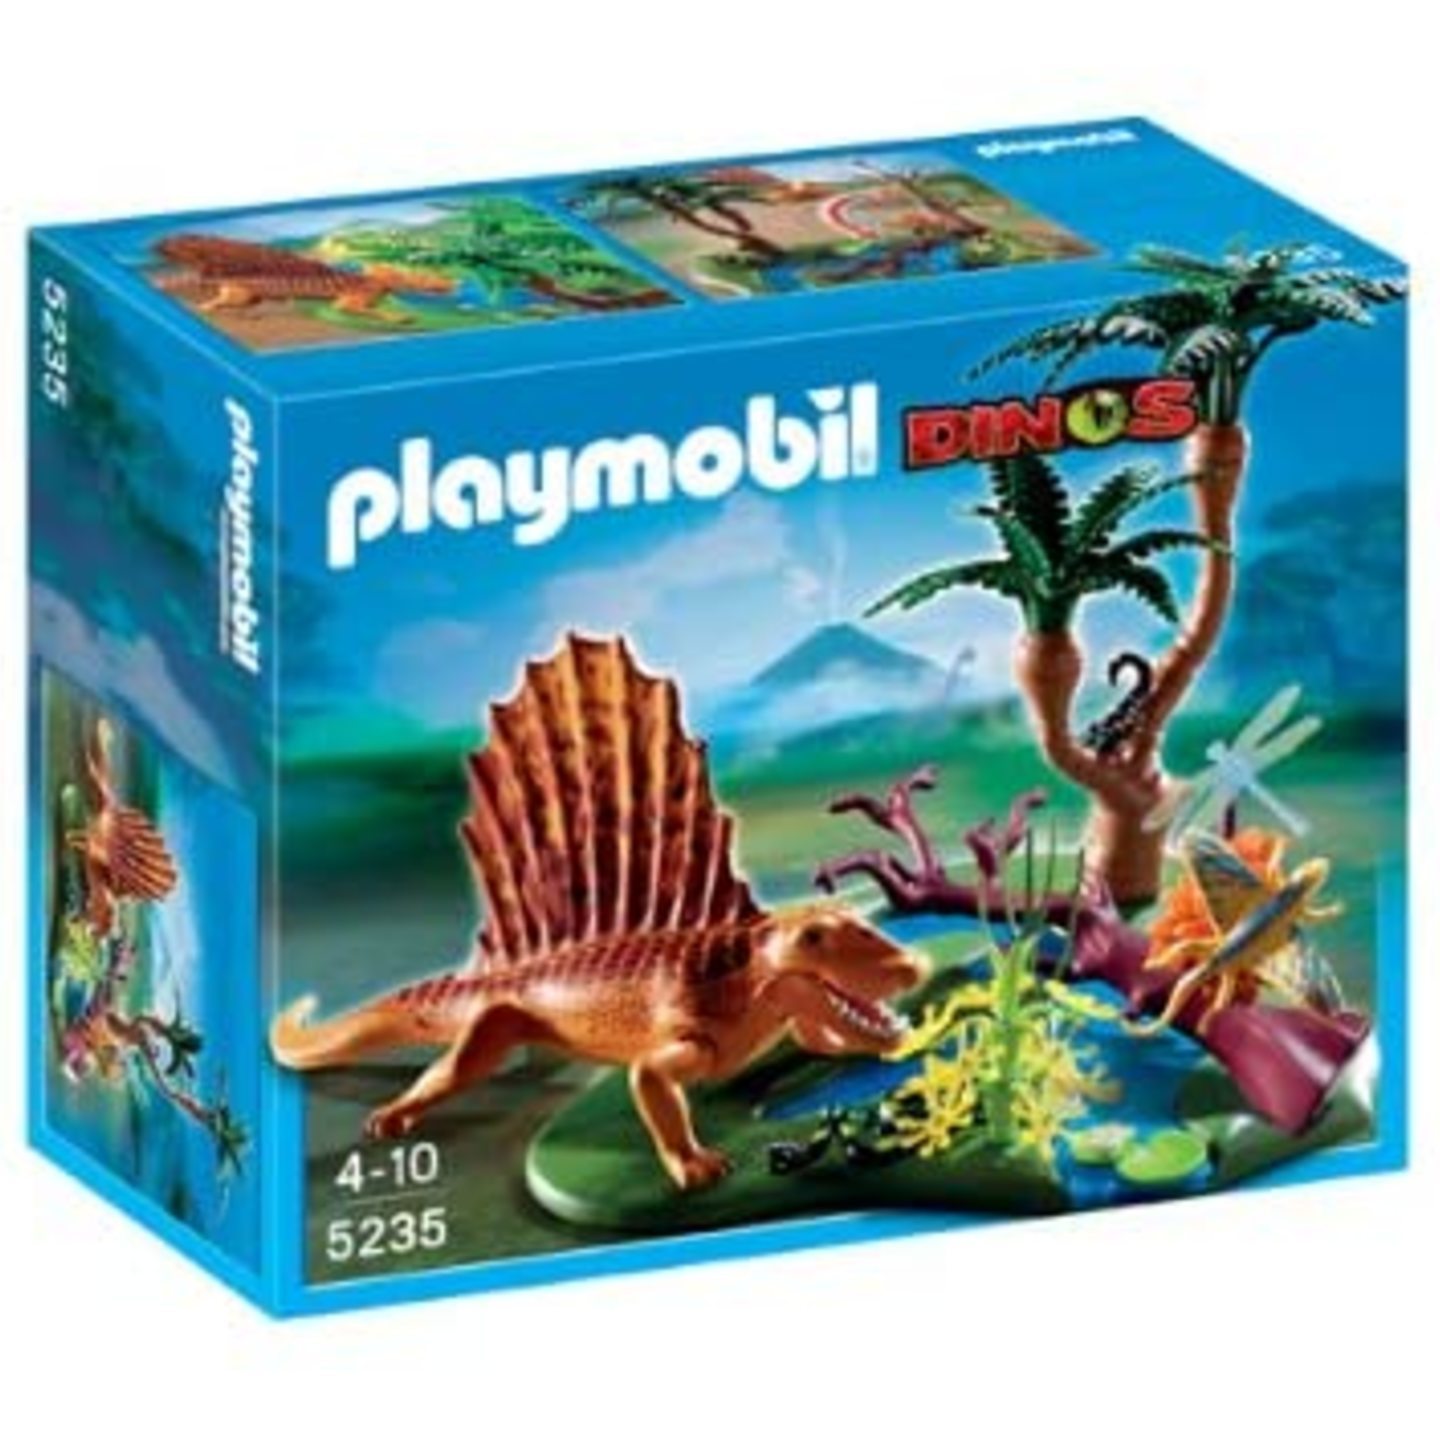 Playmobil 5235 Dinos for kids (4 to 10 years)